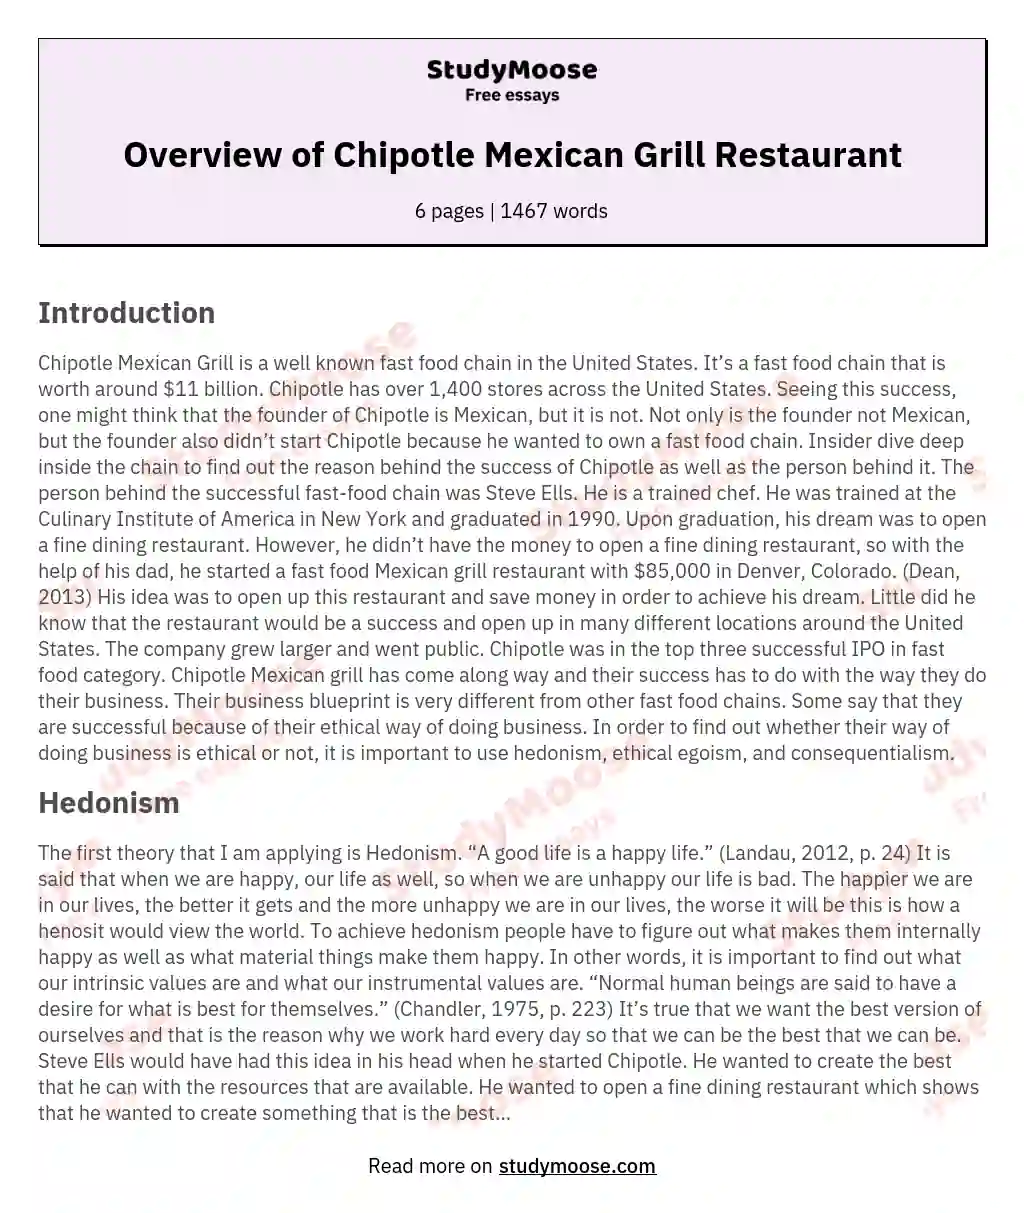 Overview of Chipotle Mexican Grill Restaurant essay